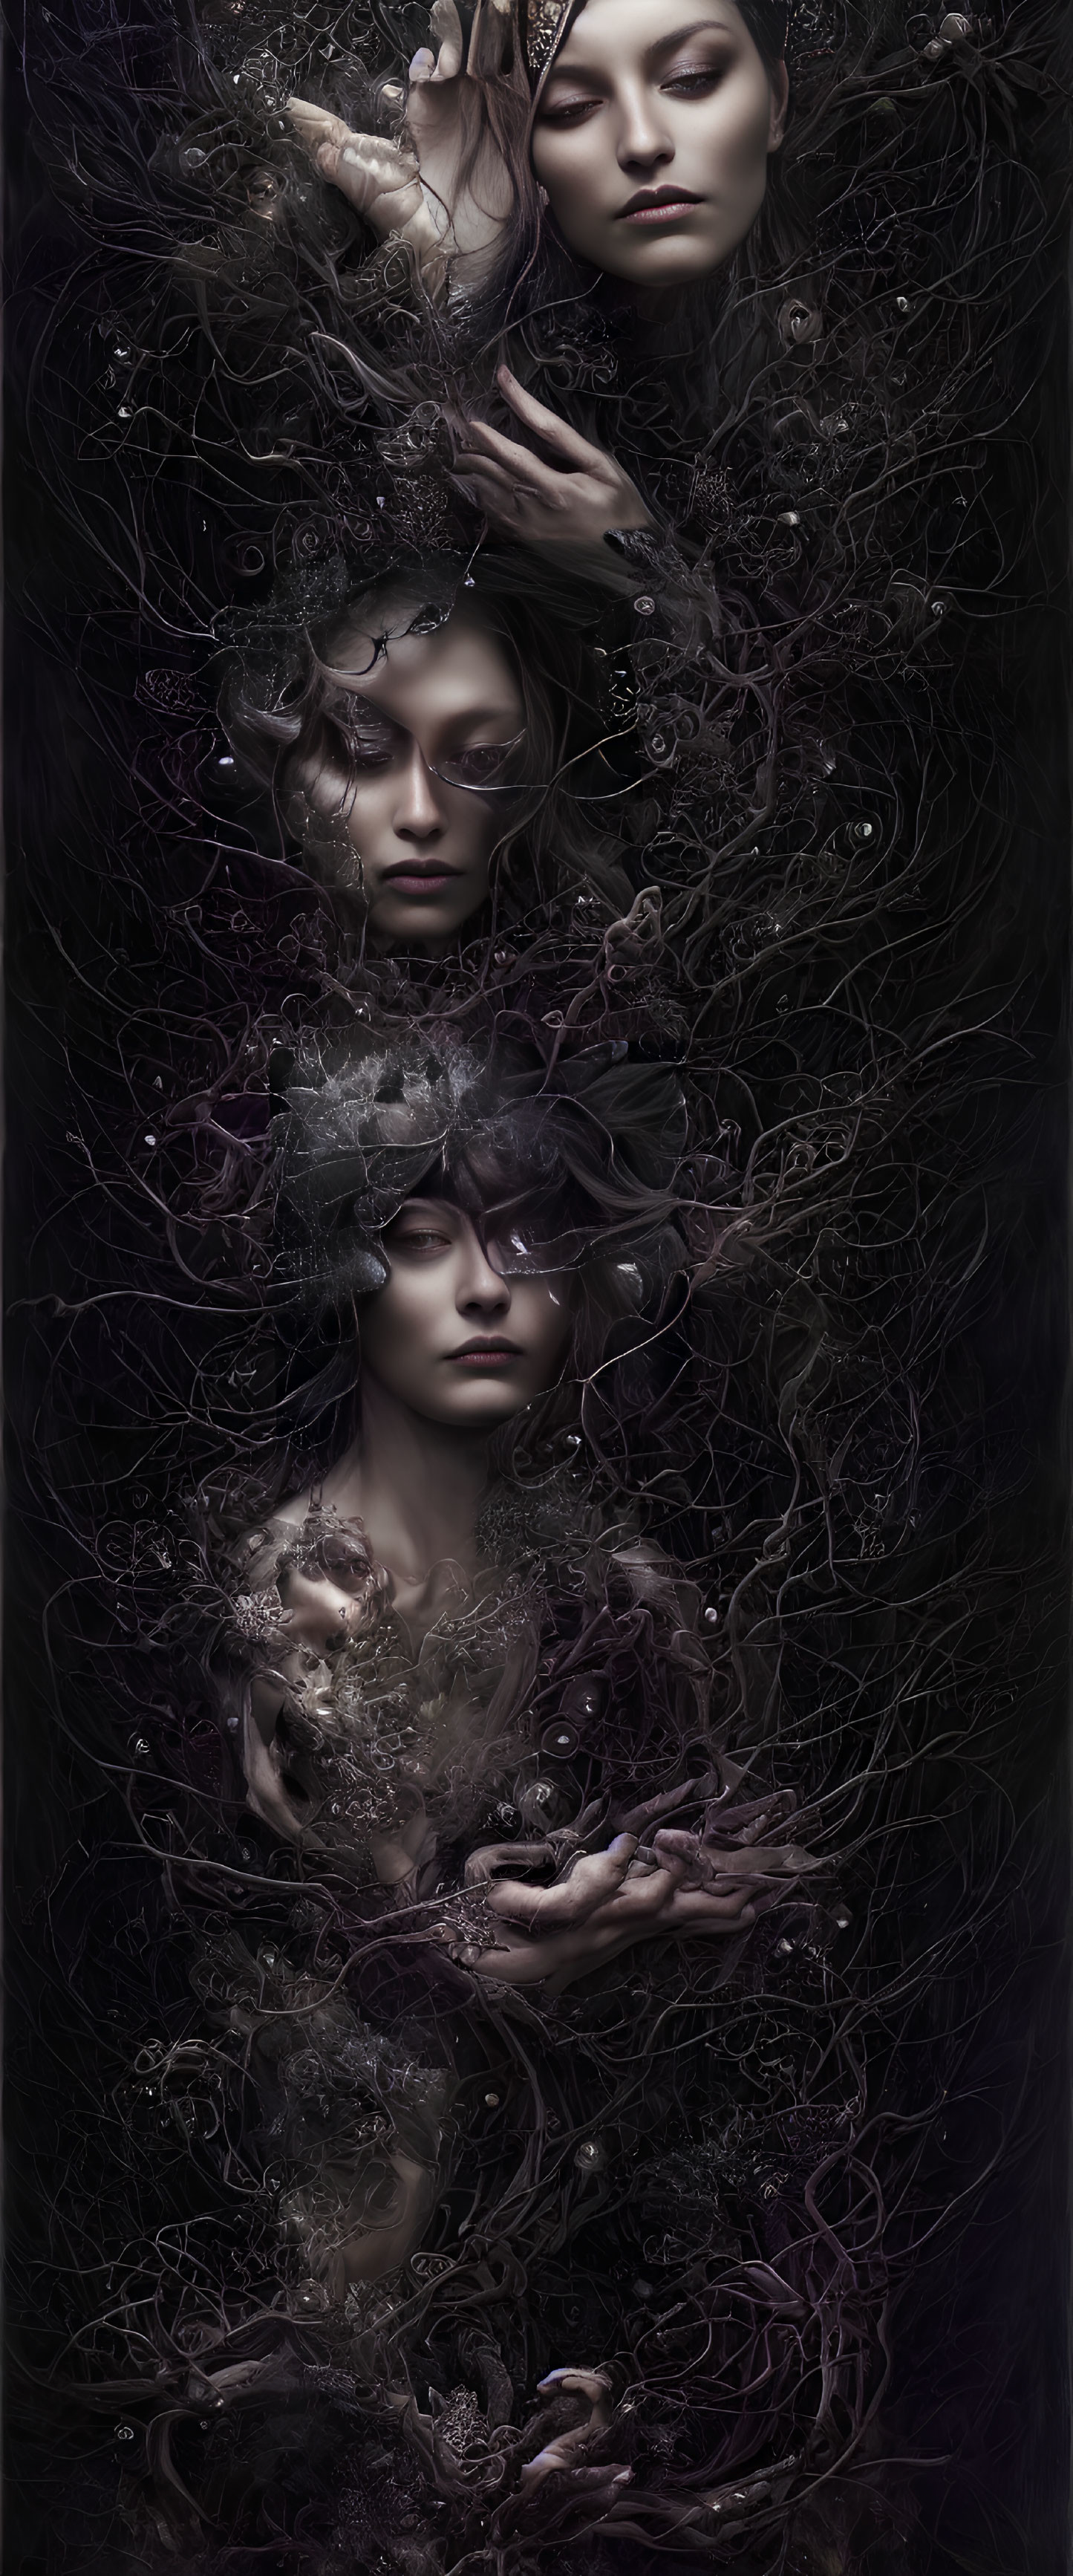 Ethereal women intertwined with dark floral patterns on black background